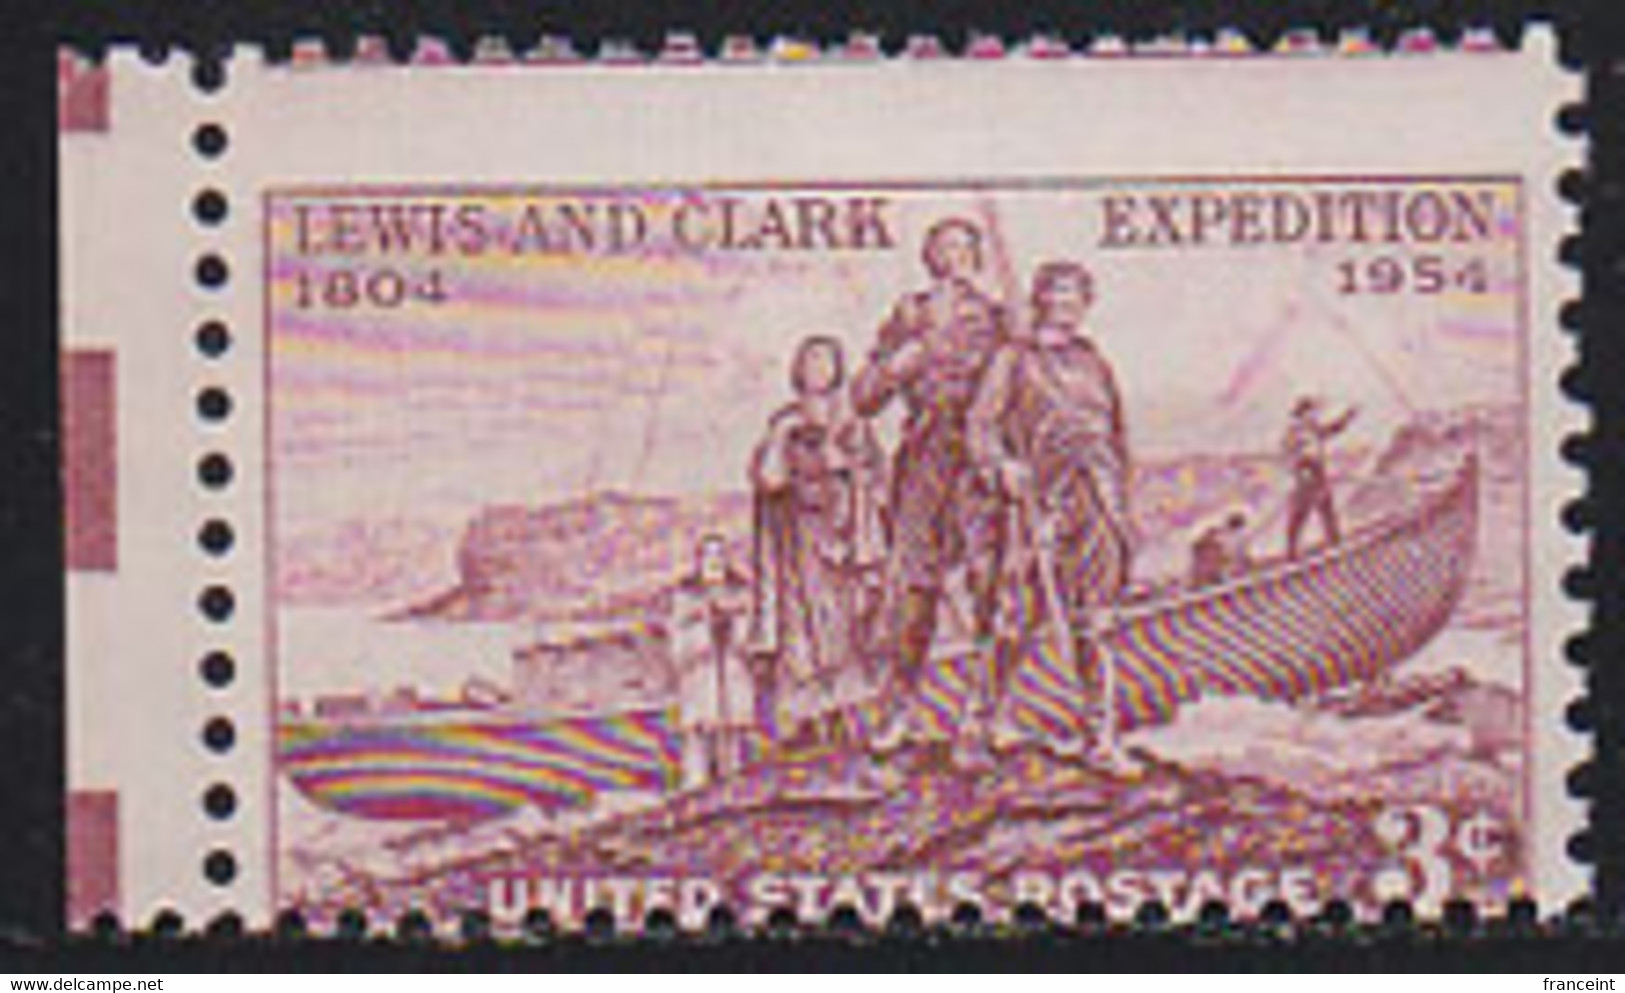 U.S.A. (1954) Lewis & Clark Expedition. Horizontal Perforation Shift Cutting Off Part Of Bottom Of Stamp. Scott No 1063. - Errors, Freaks & Oddities (EFOs)